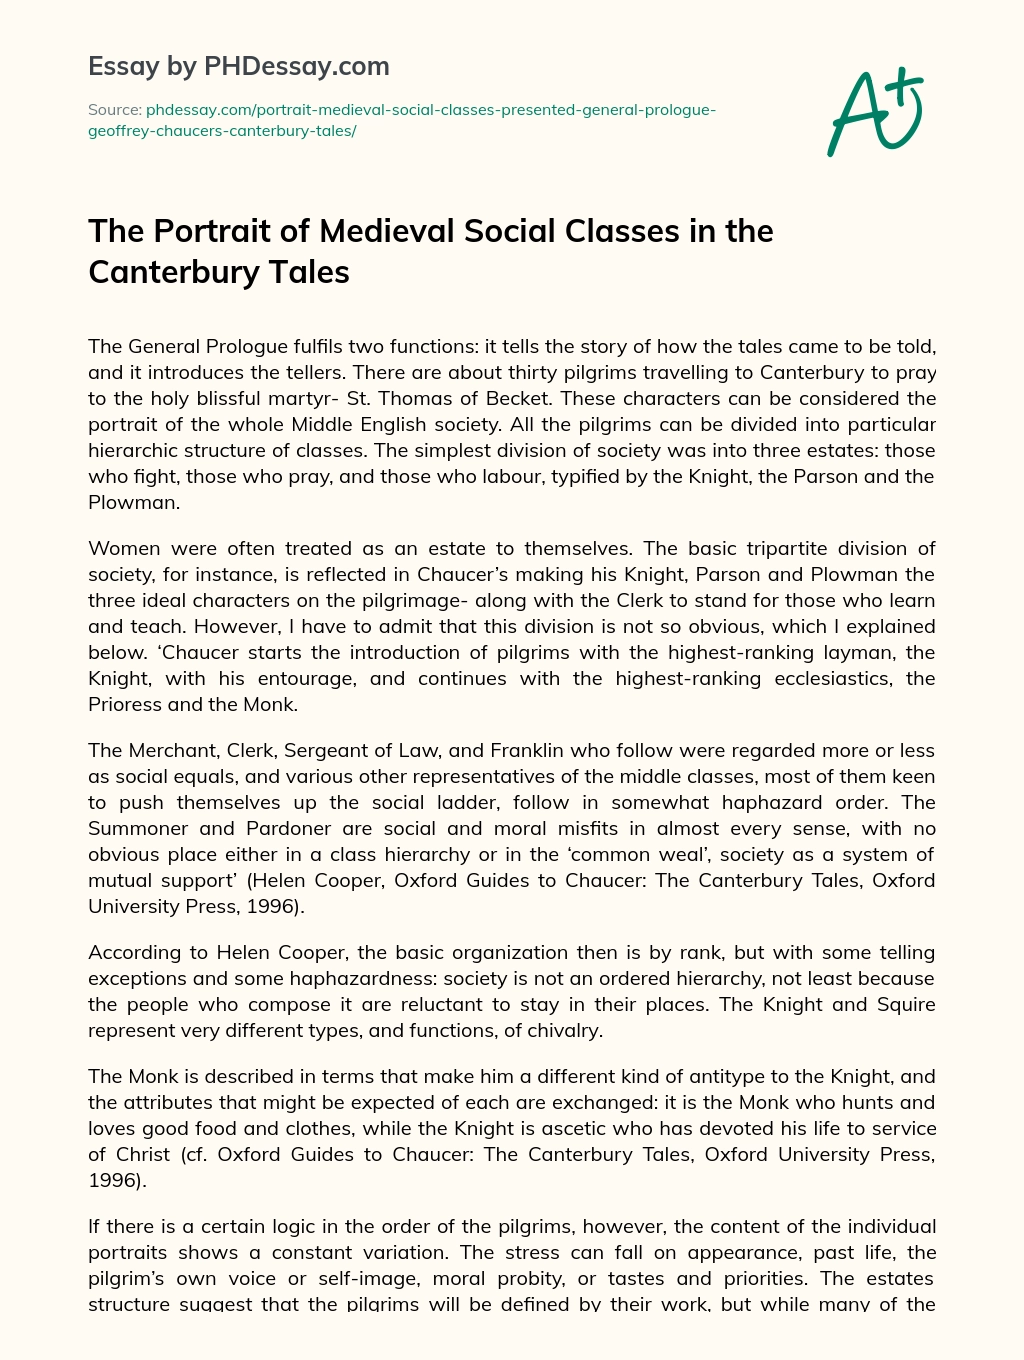 The Portrait of Medieval Social Classes in the Canterbury Tales essay